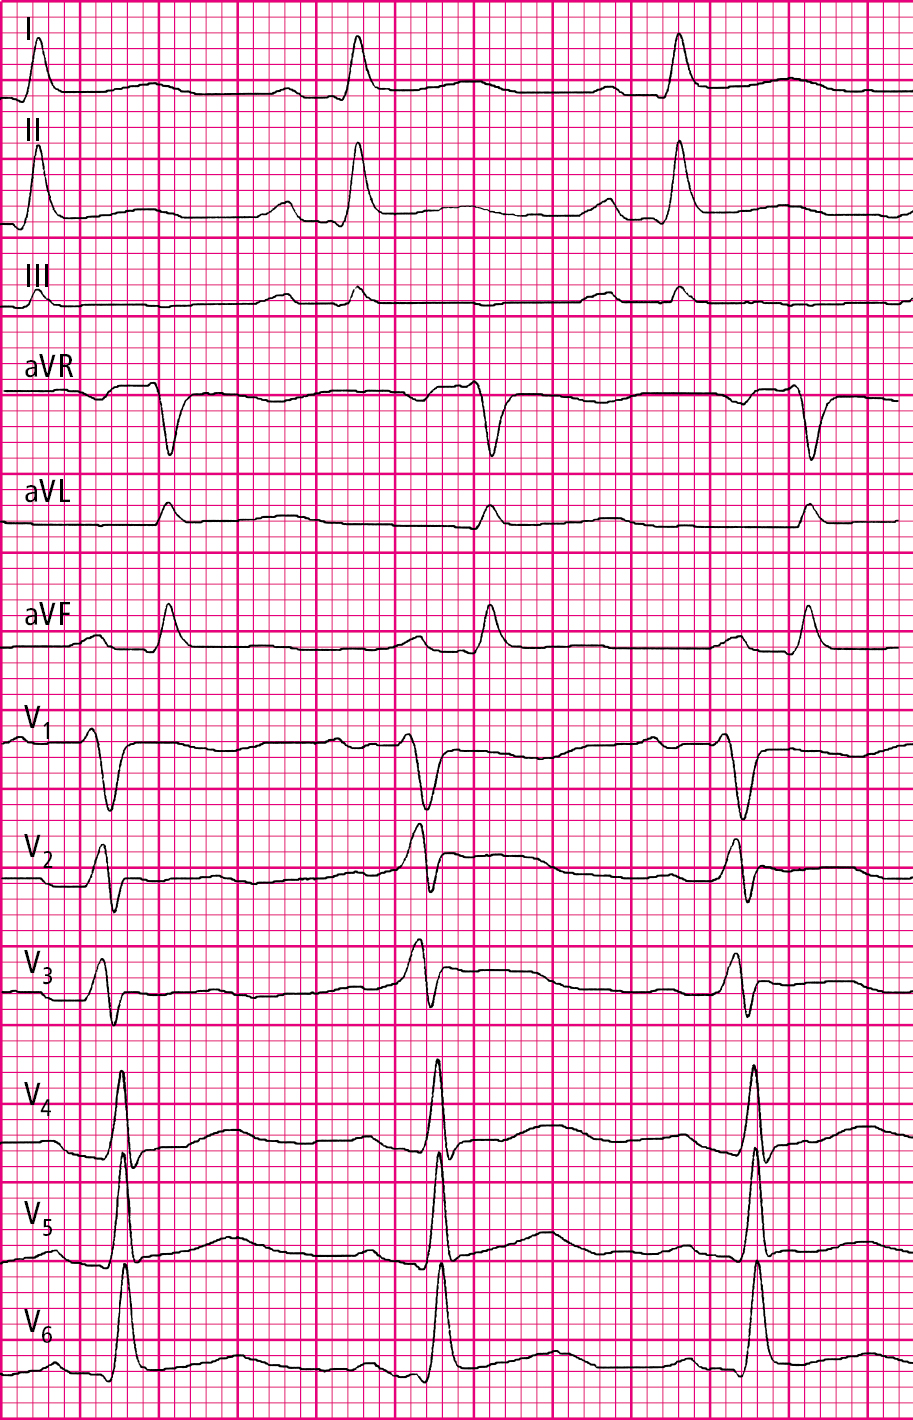 Figure 031_2424.  Echocardiography of a patient with acute pericarditis: PR-segment depressions and ST-segment elevations in all leads (paper speed, 50 mm/s). 